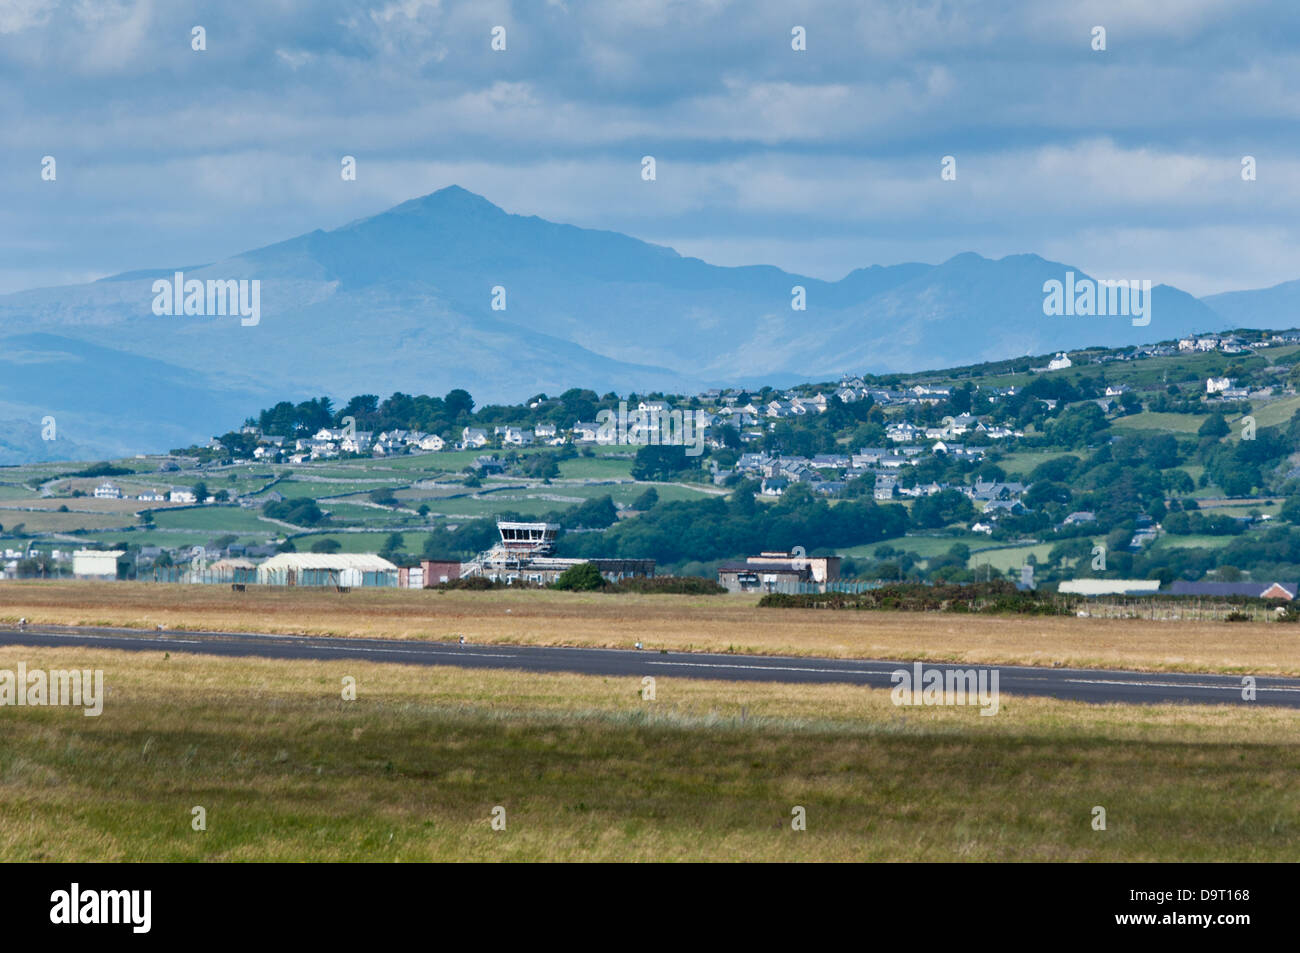 Mount Snowdon towers over the airfield buildings at Llanbedr, one of the UK's most picturesque airfields Stock Photo